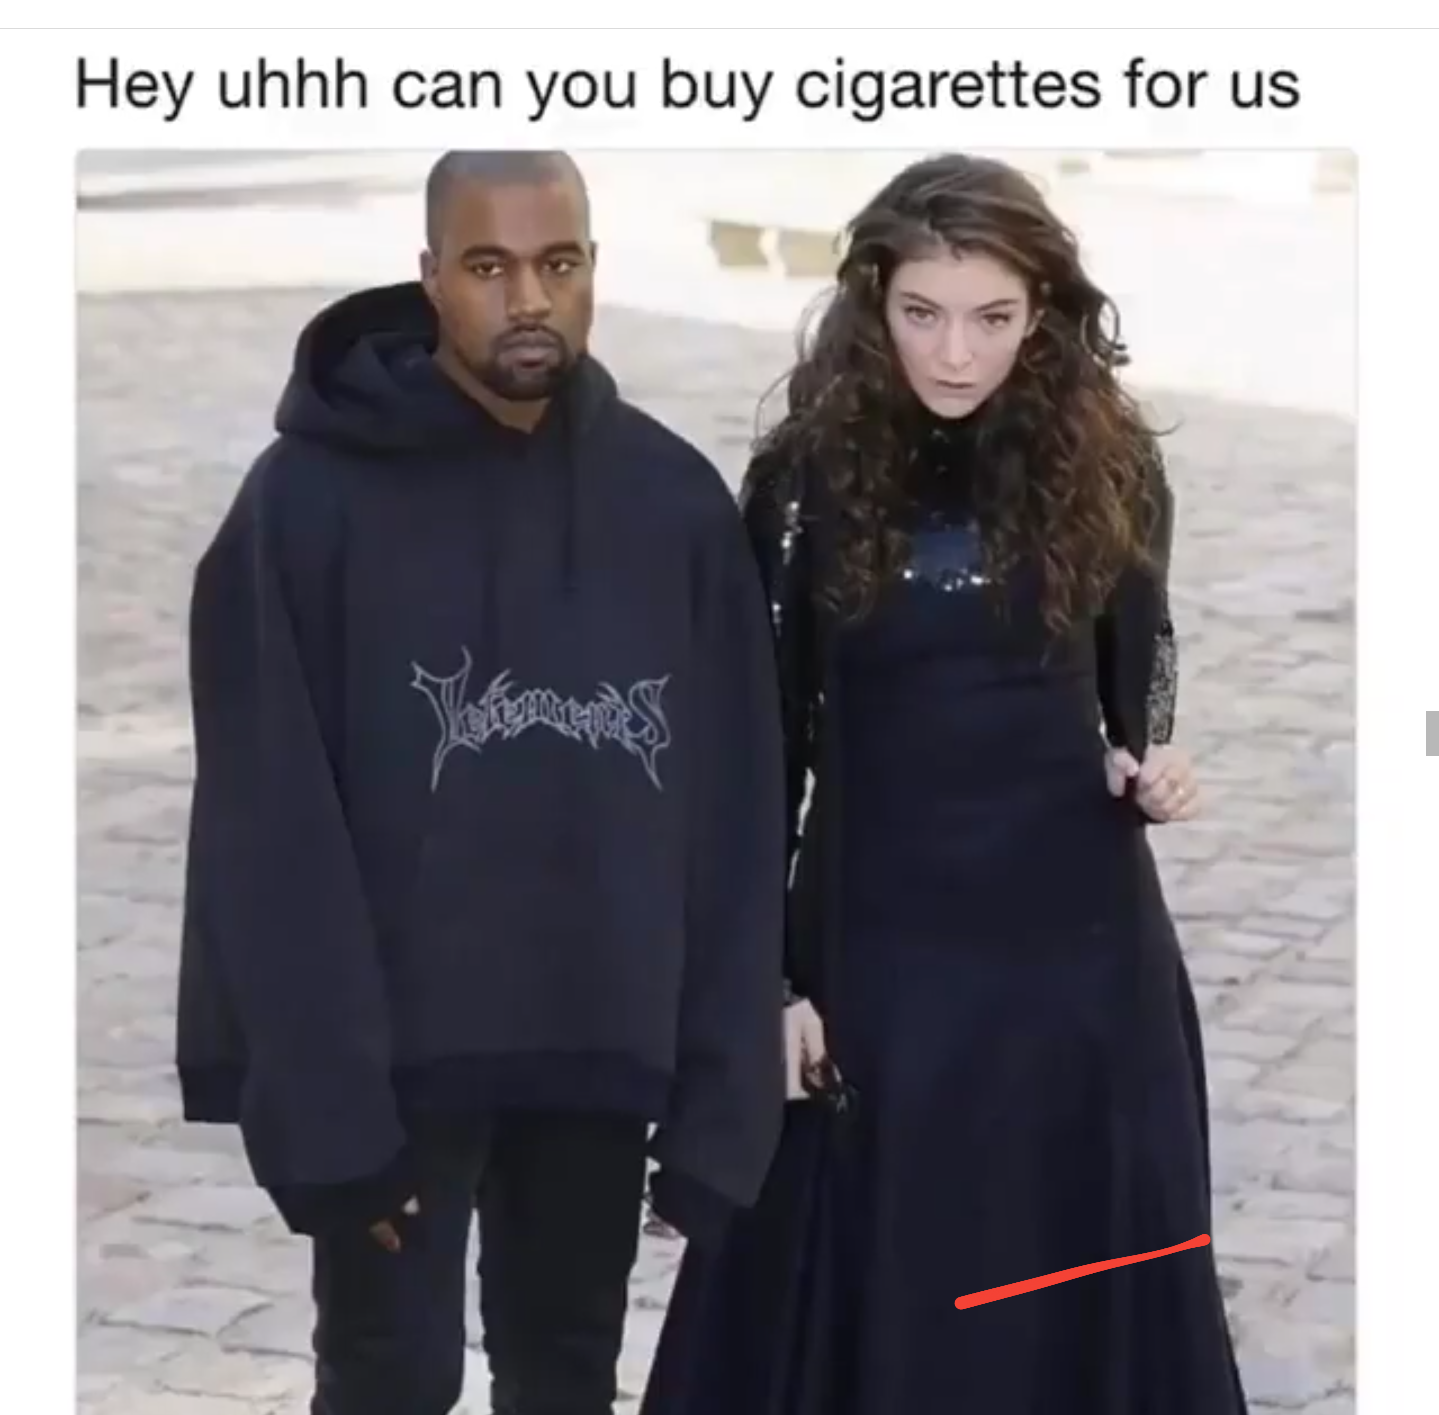 kanye lorde - Hey uhhh can you buy cigarettes for us